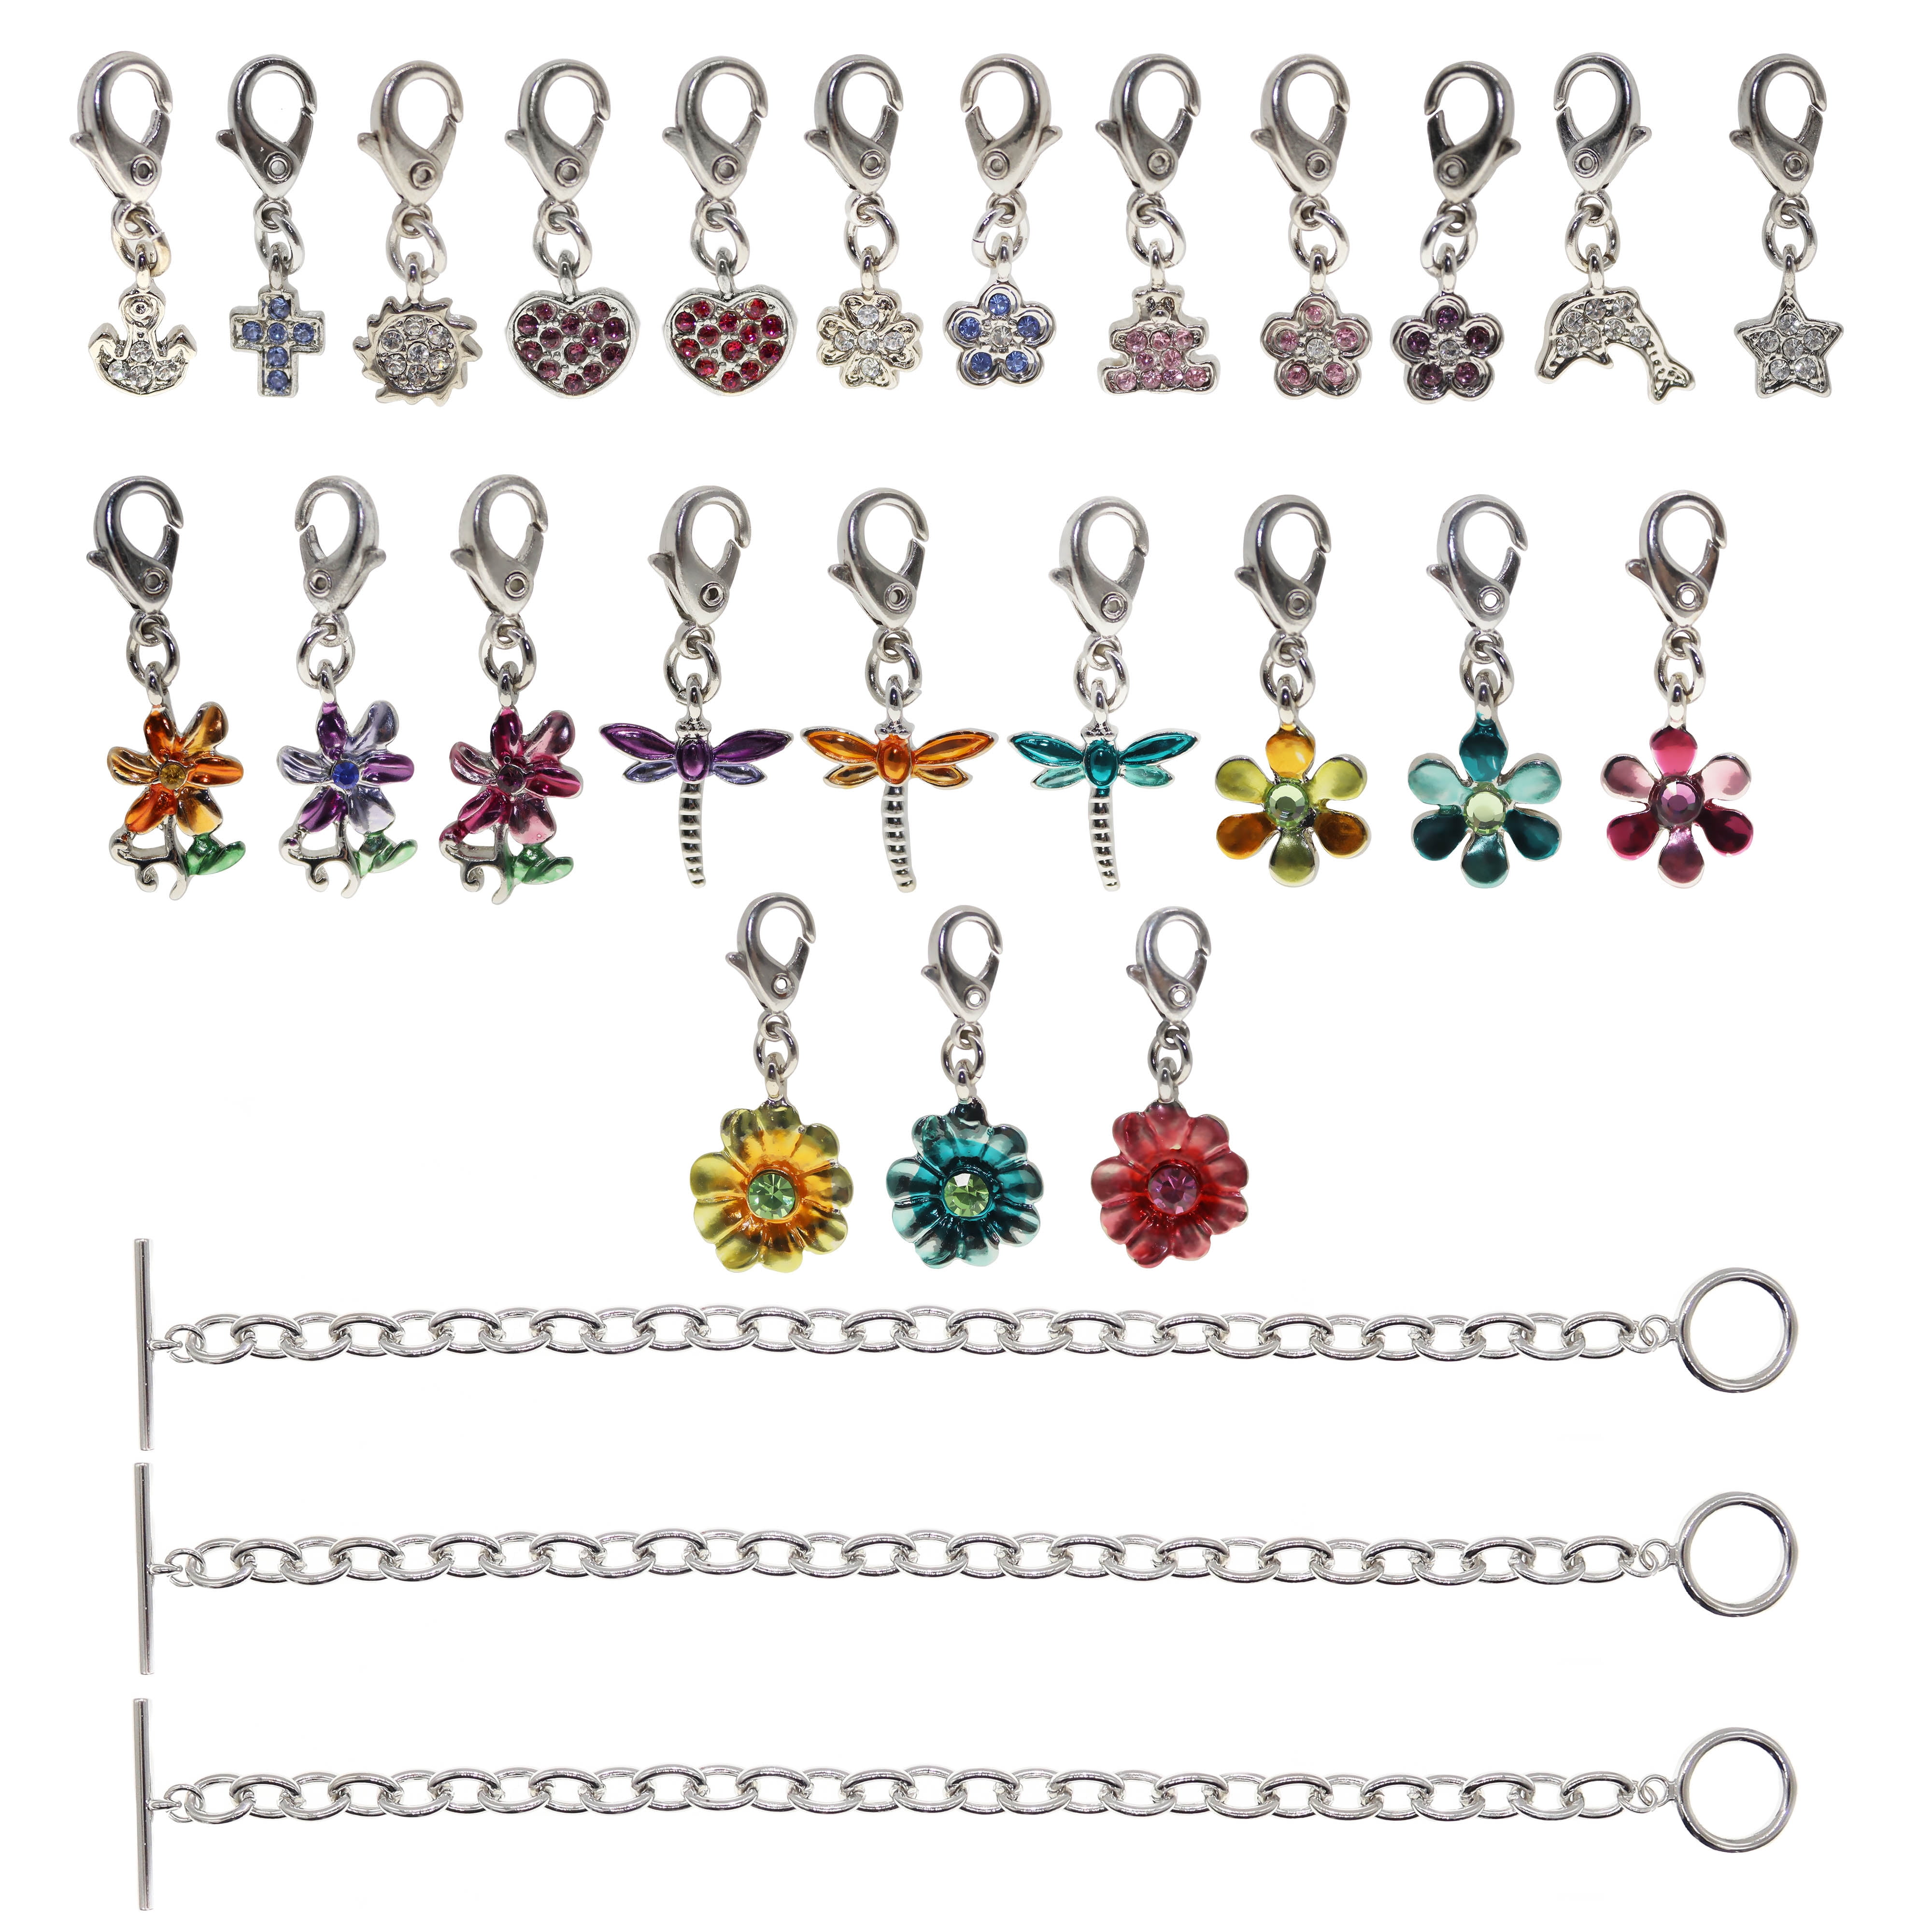 Beads Findings NEW ITEMS Small Random Jewelry Making Grab bag Charms